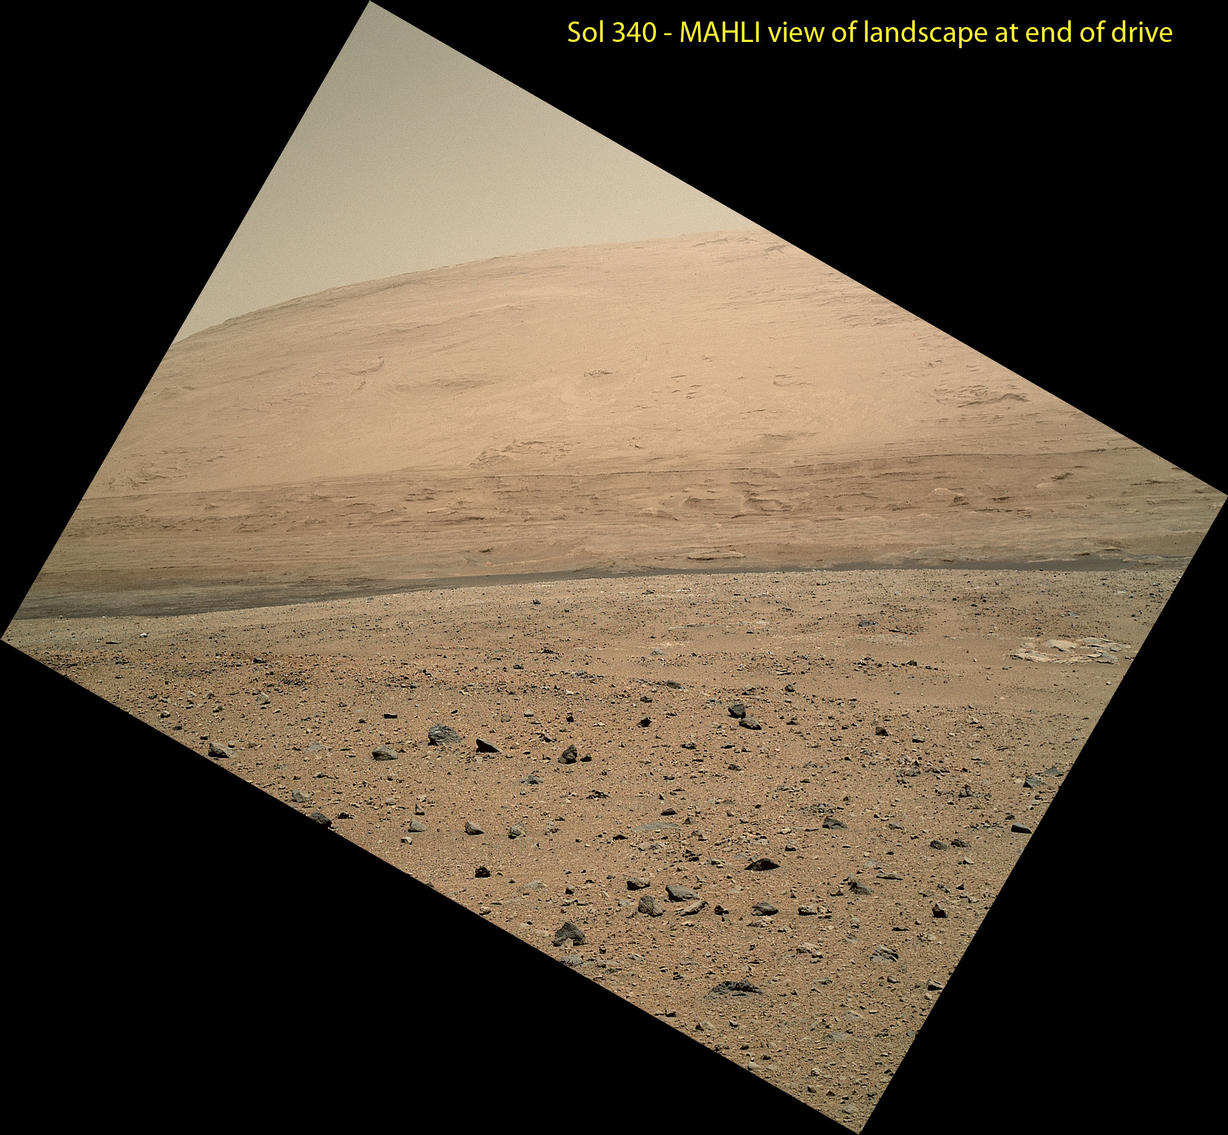 View From Curiosity's Arm-Mounted Camera After a Long Drive